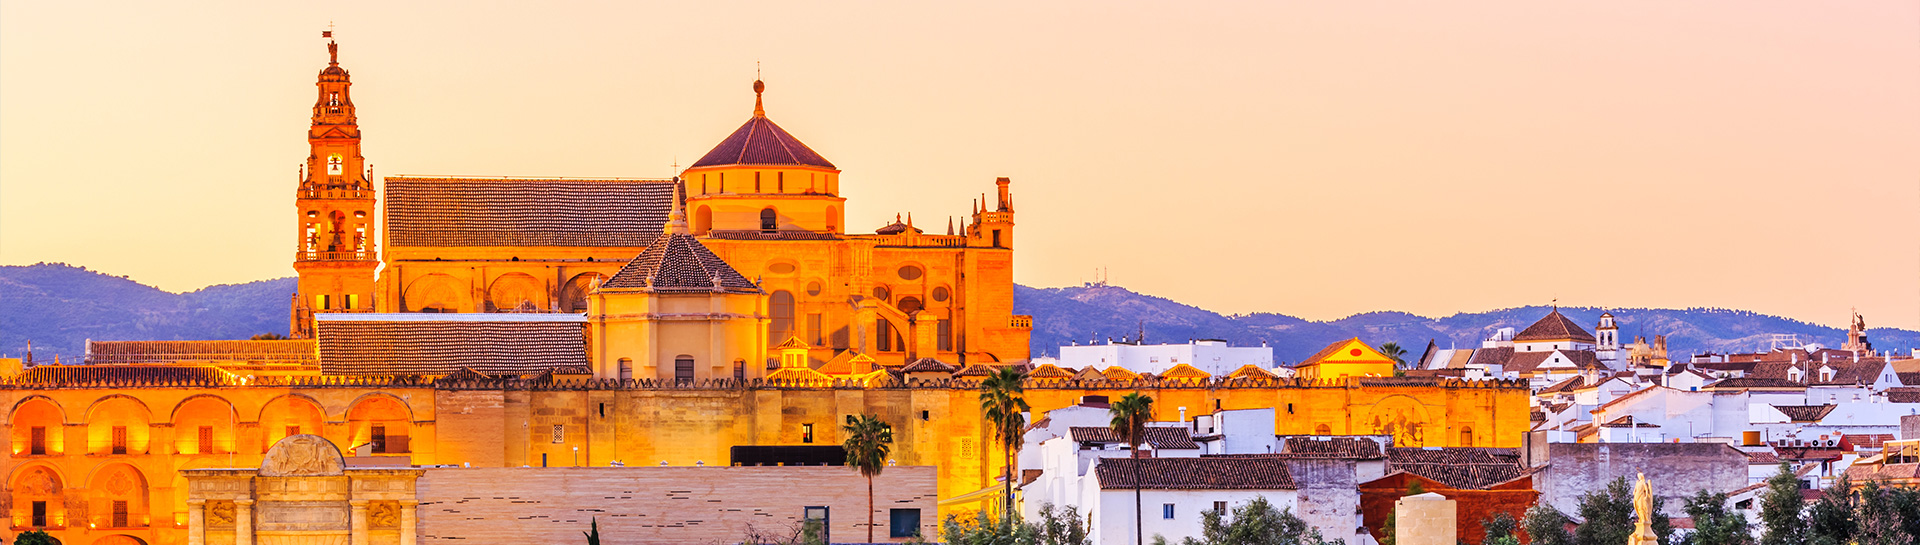 Cordoba, information about this popular destination in Spain by the AFRICA MOROCCO LINK company.